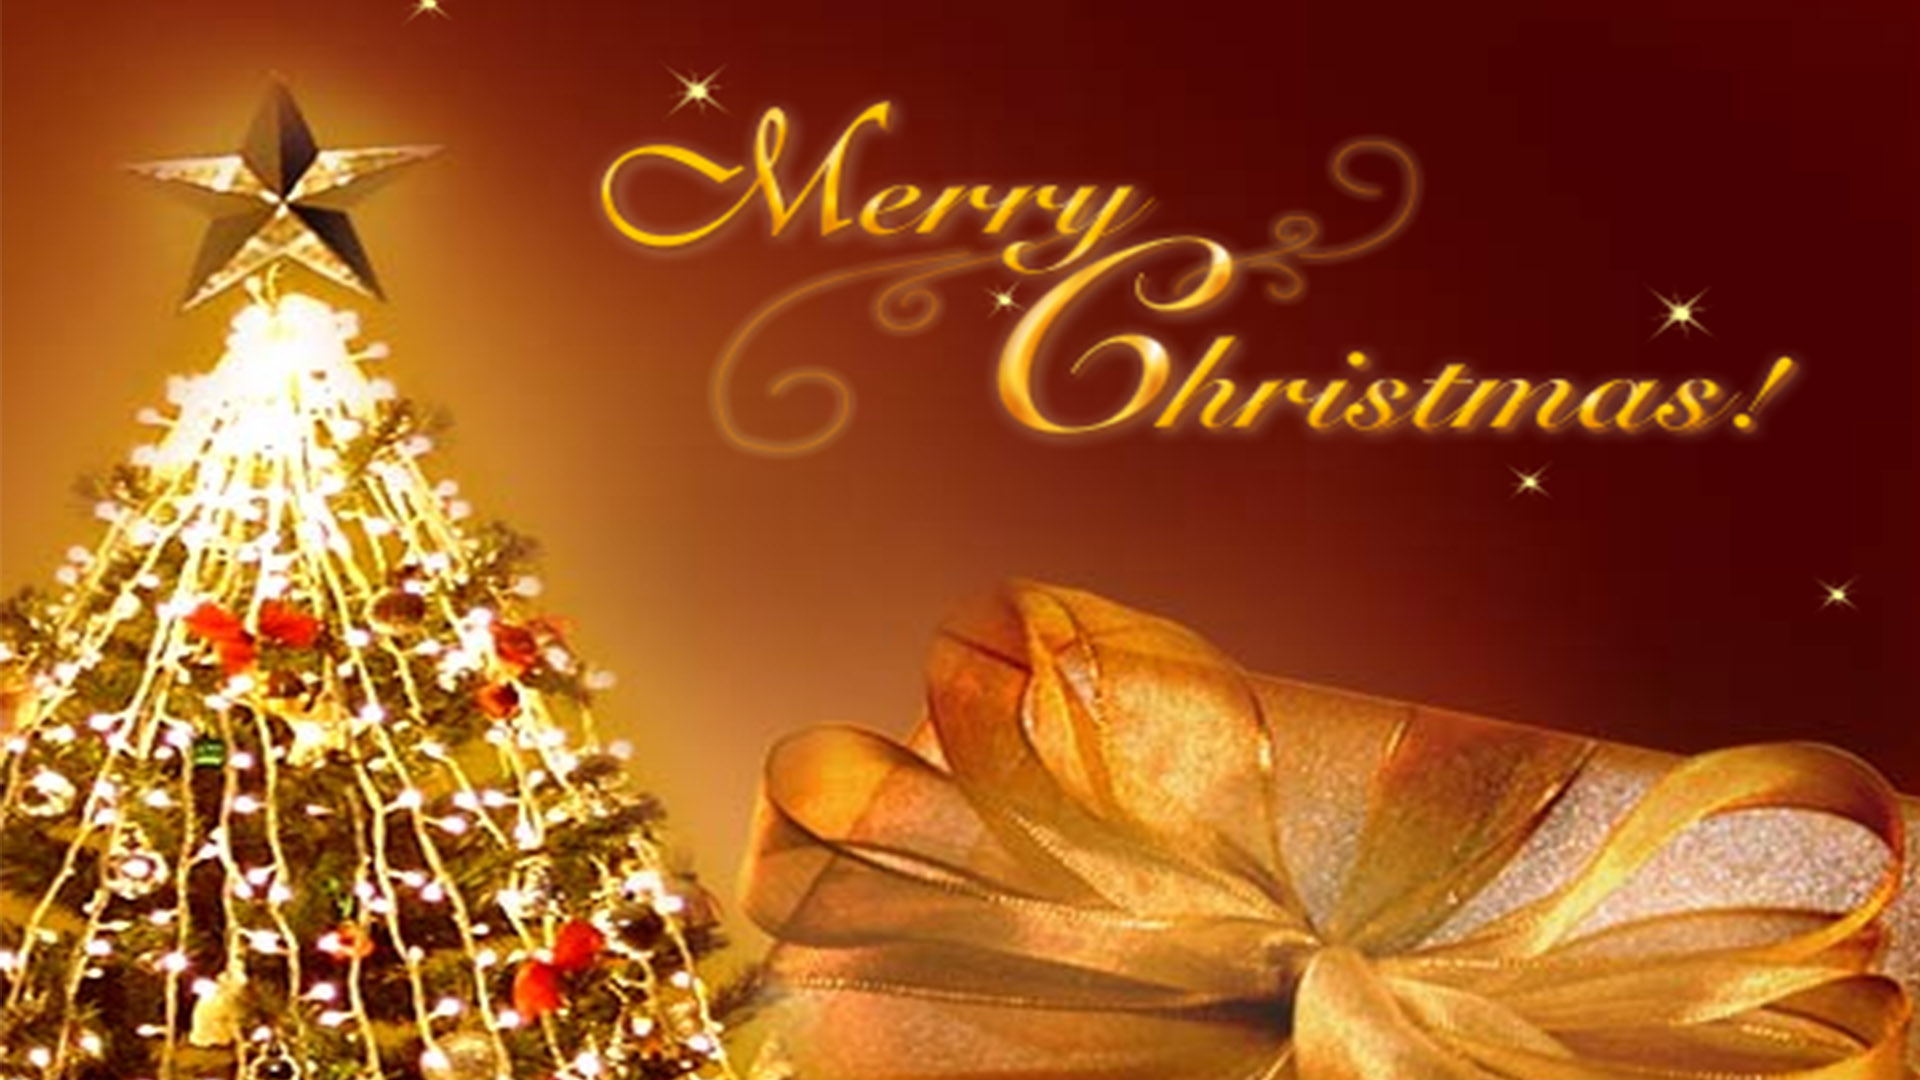 merry christmas images hd picture